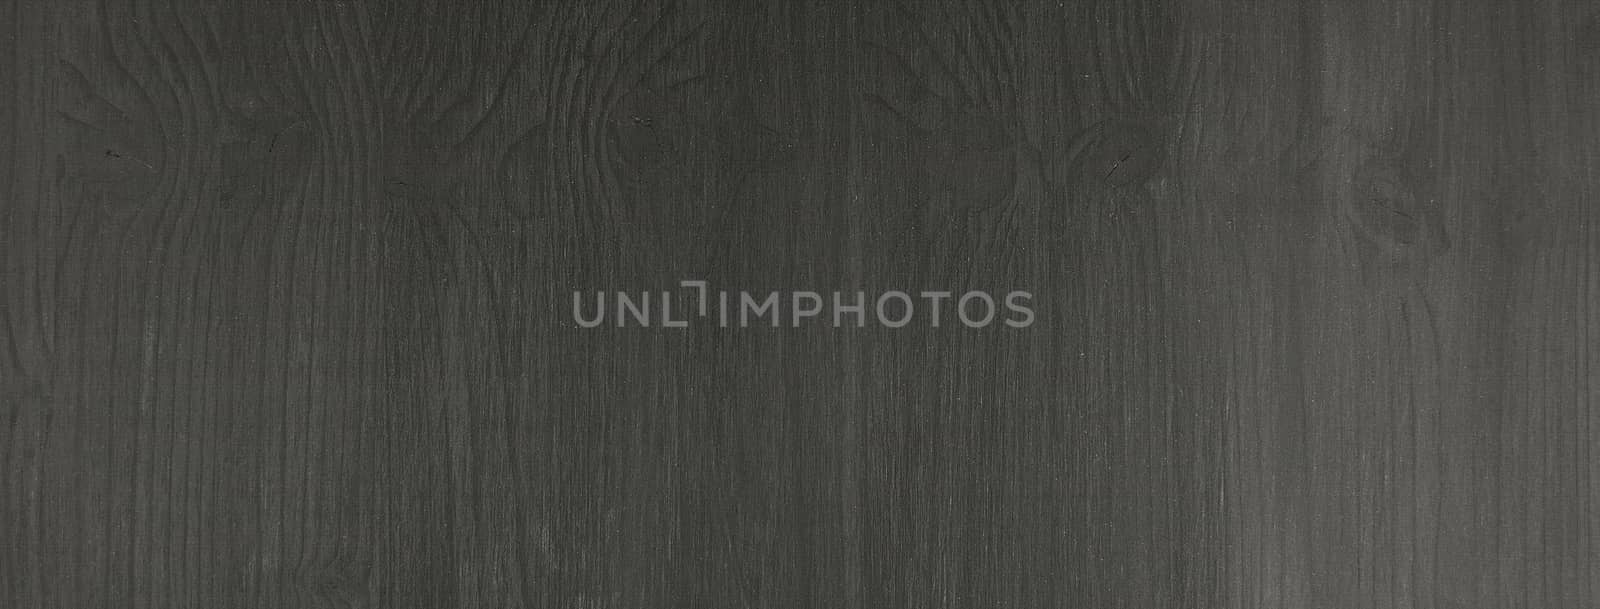 Texture of a black wooden board. May be used as background